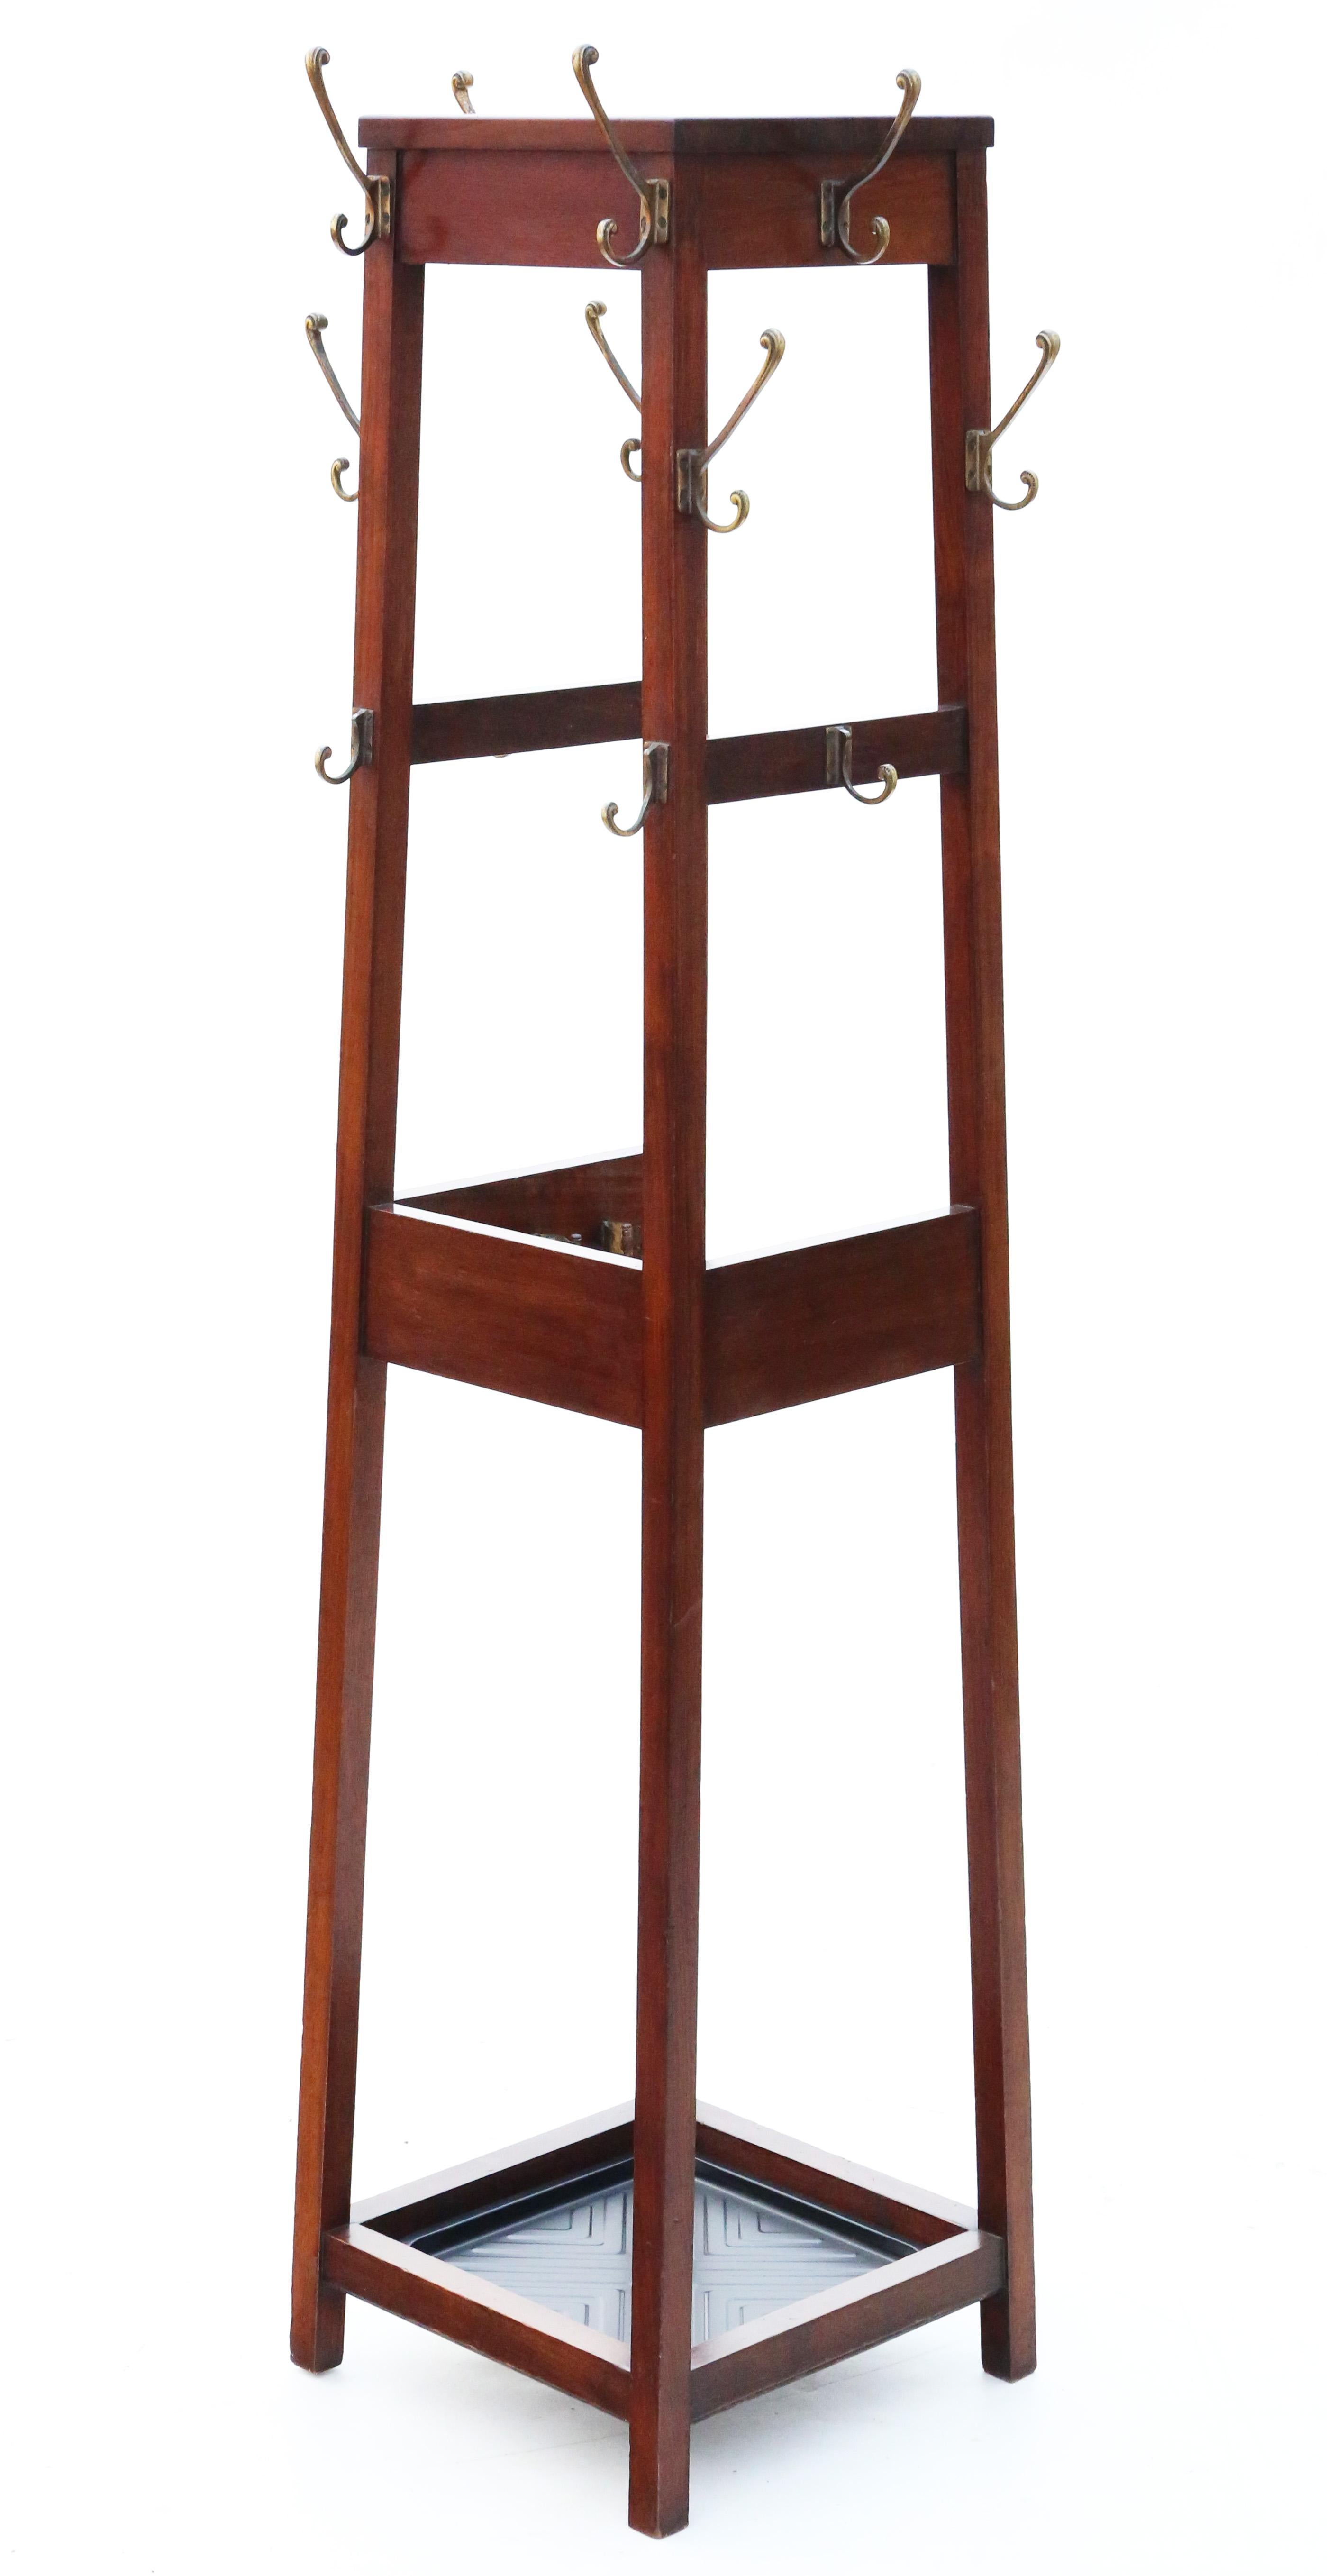 Antique quality mahogany coat hat stick umbrella stand C1920.

Solid and heavy, with no loose joints. A rare find.

Overall maximum dimensions:

41cm square base and 31cm square top (47cm x 37cm including hooks) x 168cm (171cm including hangers)